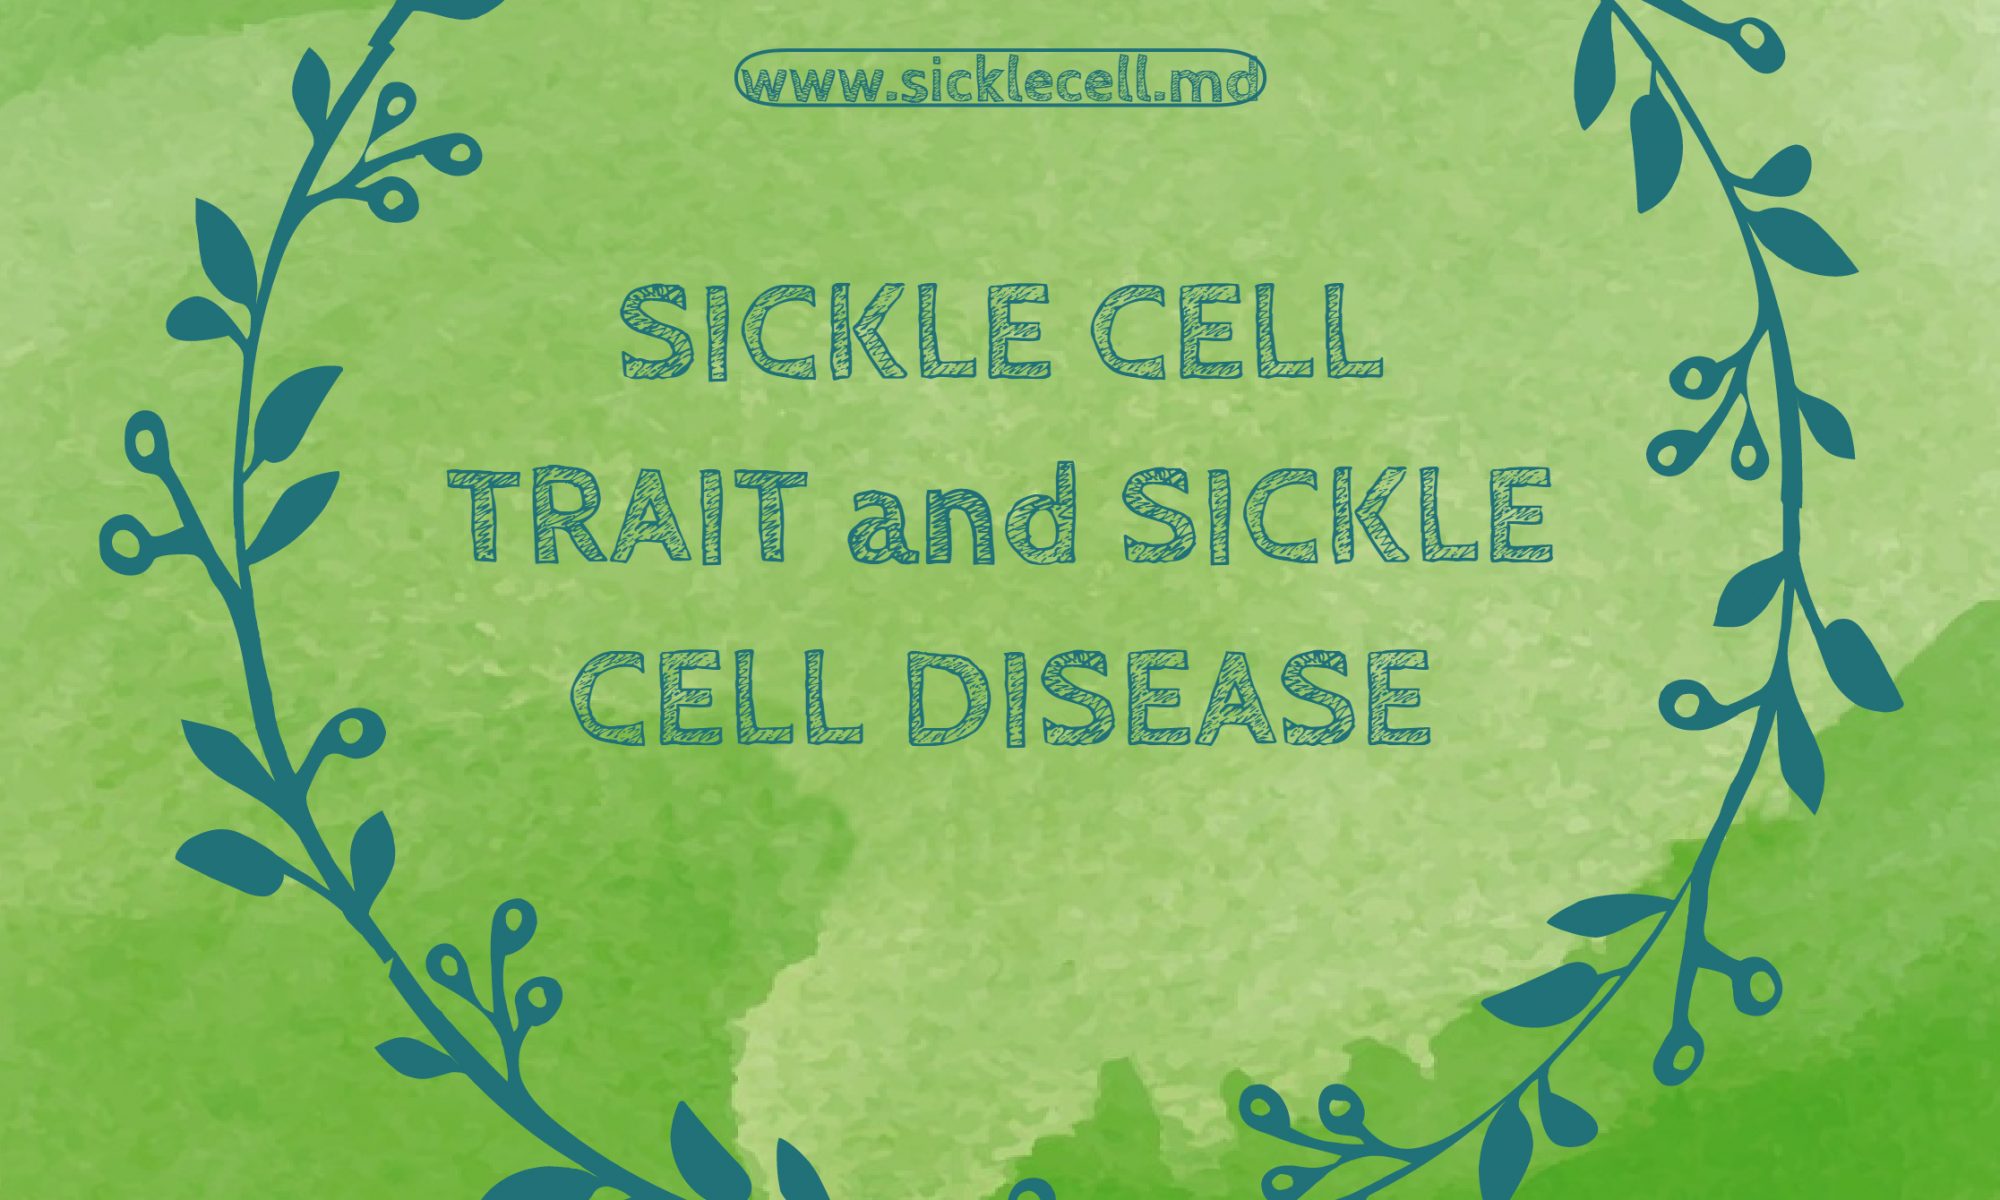 SICKLE CELL TRAIT and SICKLE CELL DISEASE